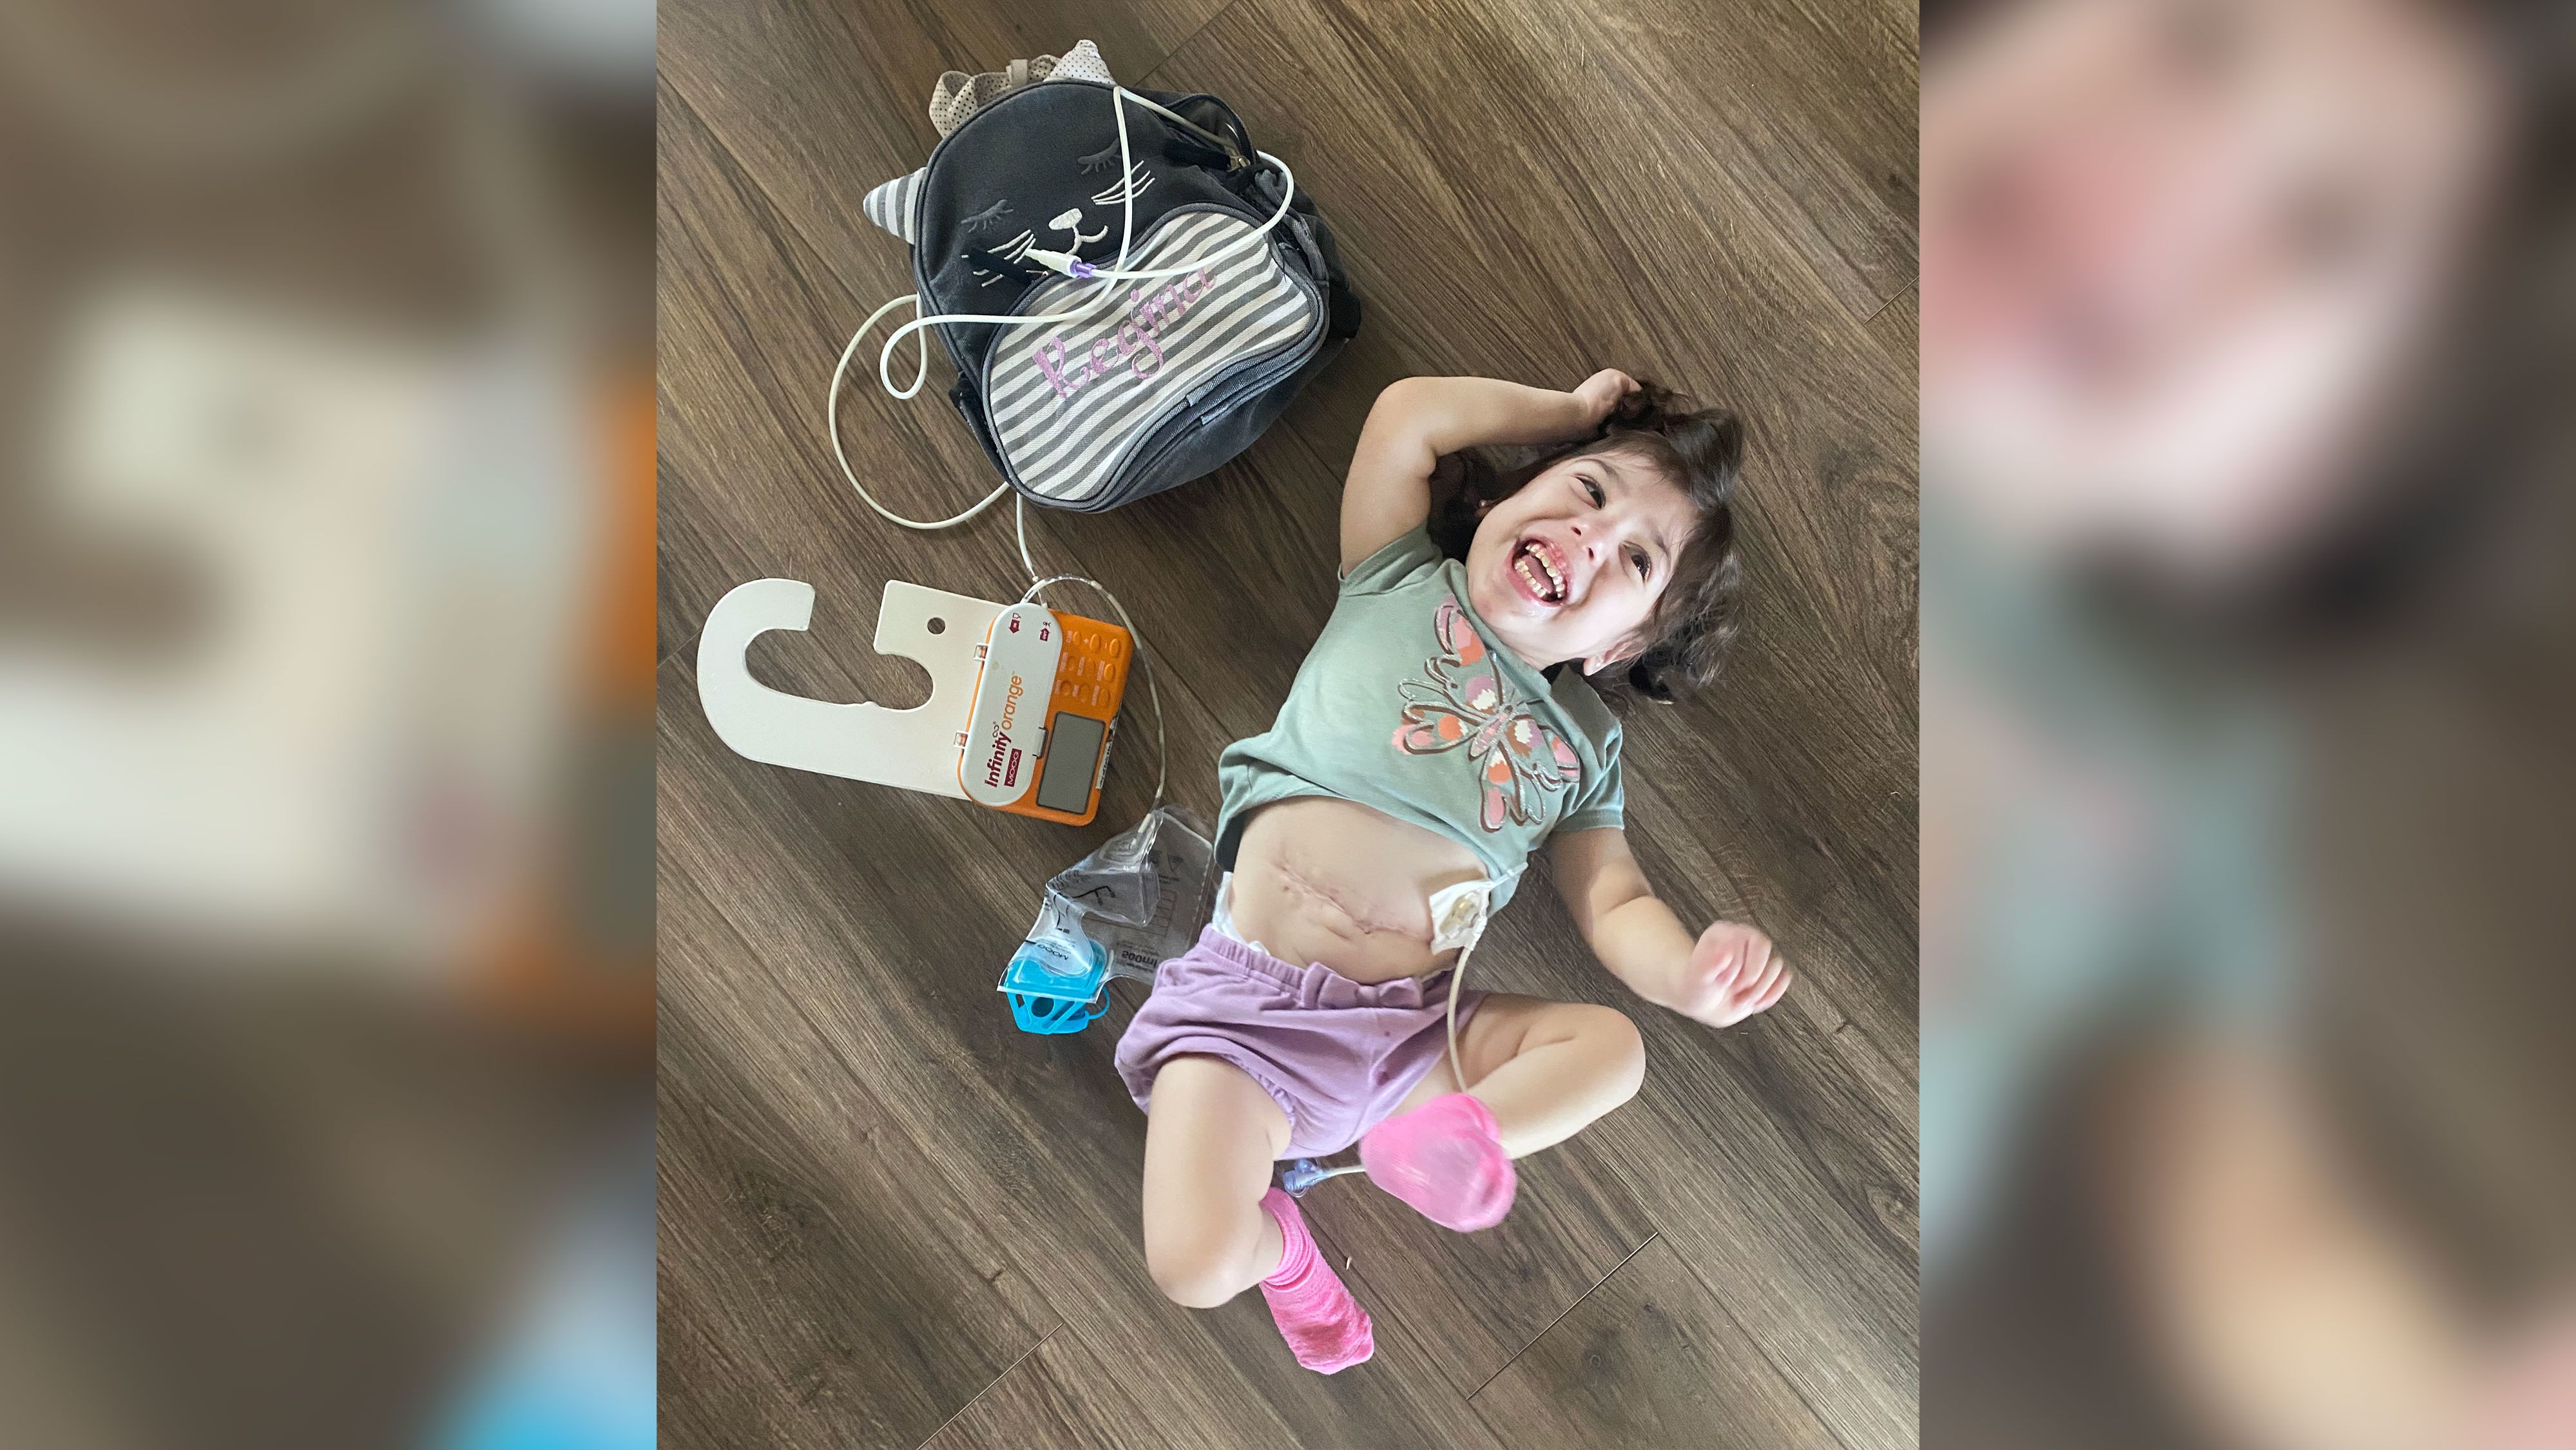 Regina Orozco, 2, lies next to her feeding tube, a device she has relied on since birth for nutrition. 